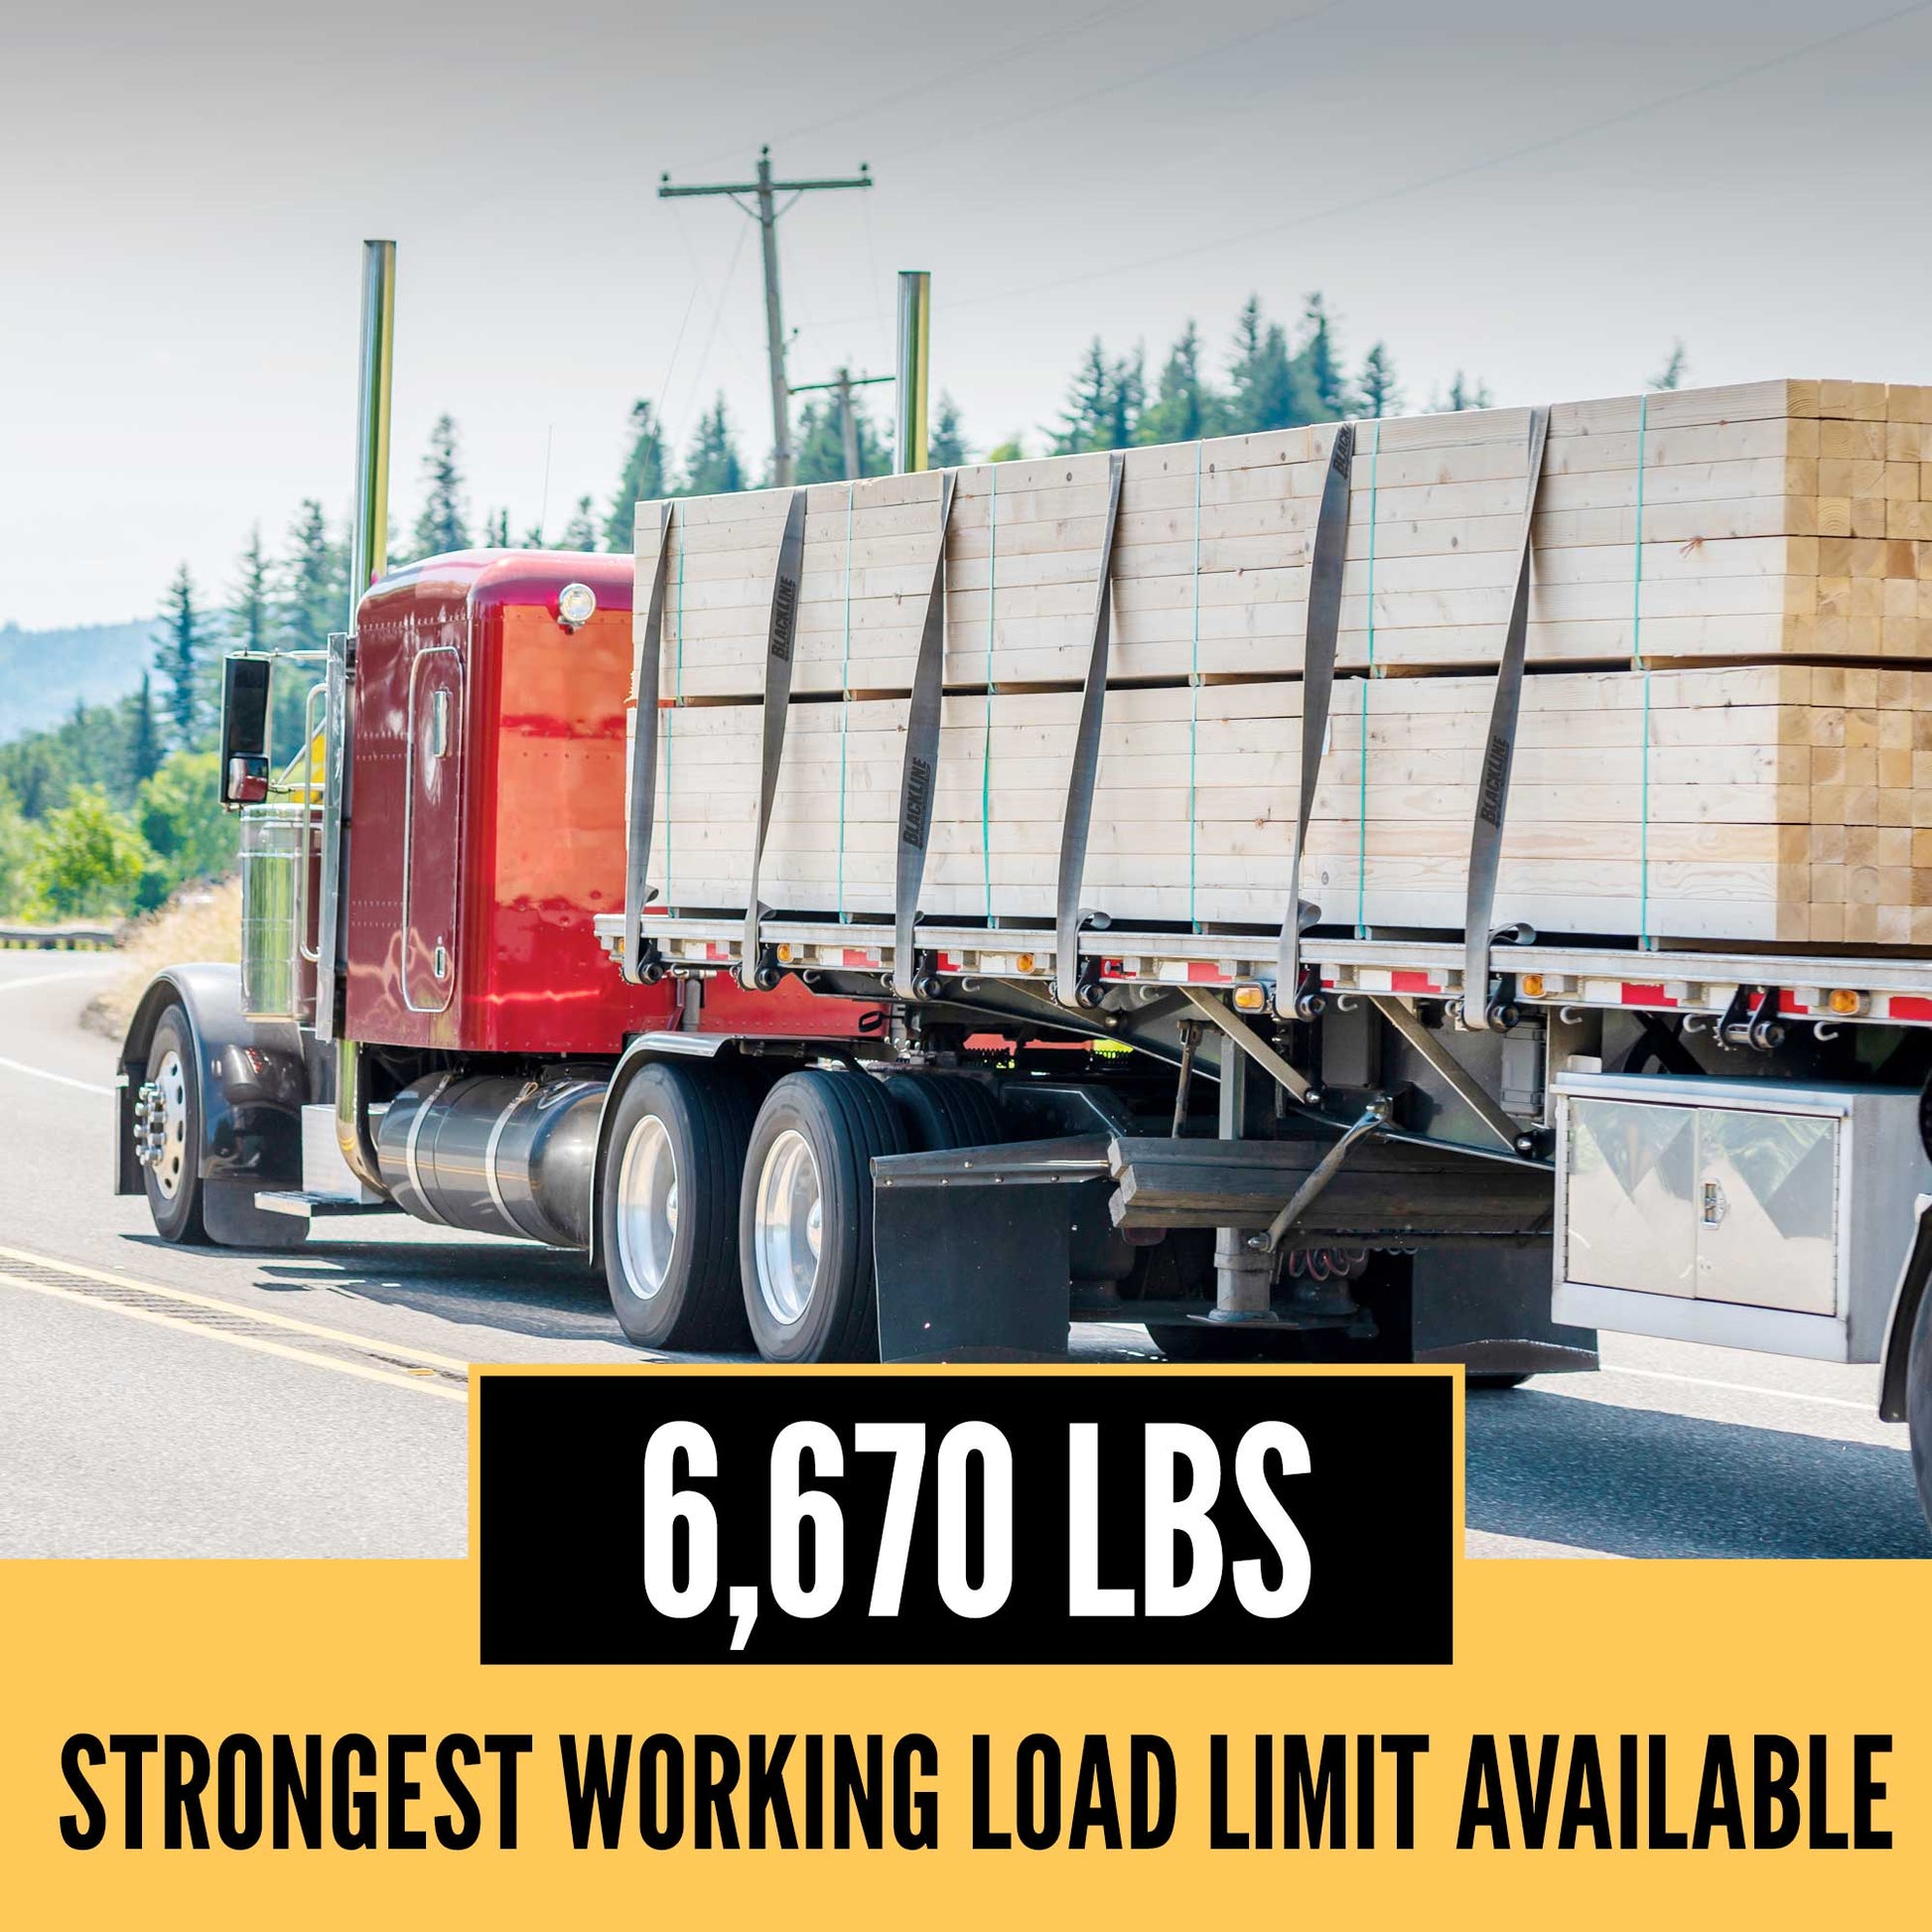 30' BlackLine strongest WLL in the industry at 6,670 lbs